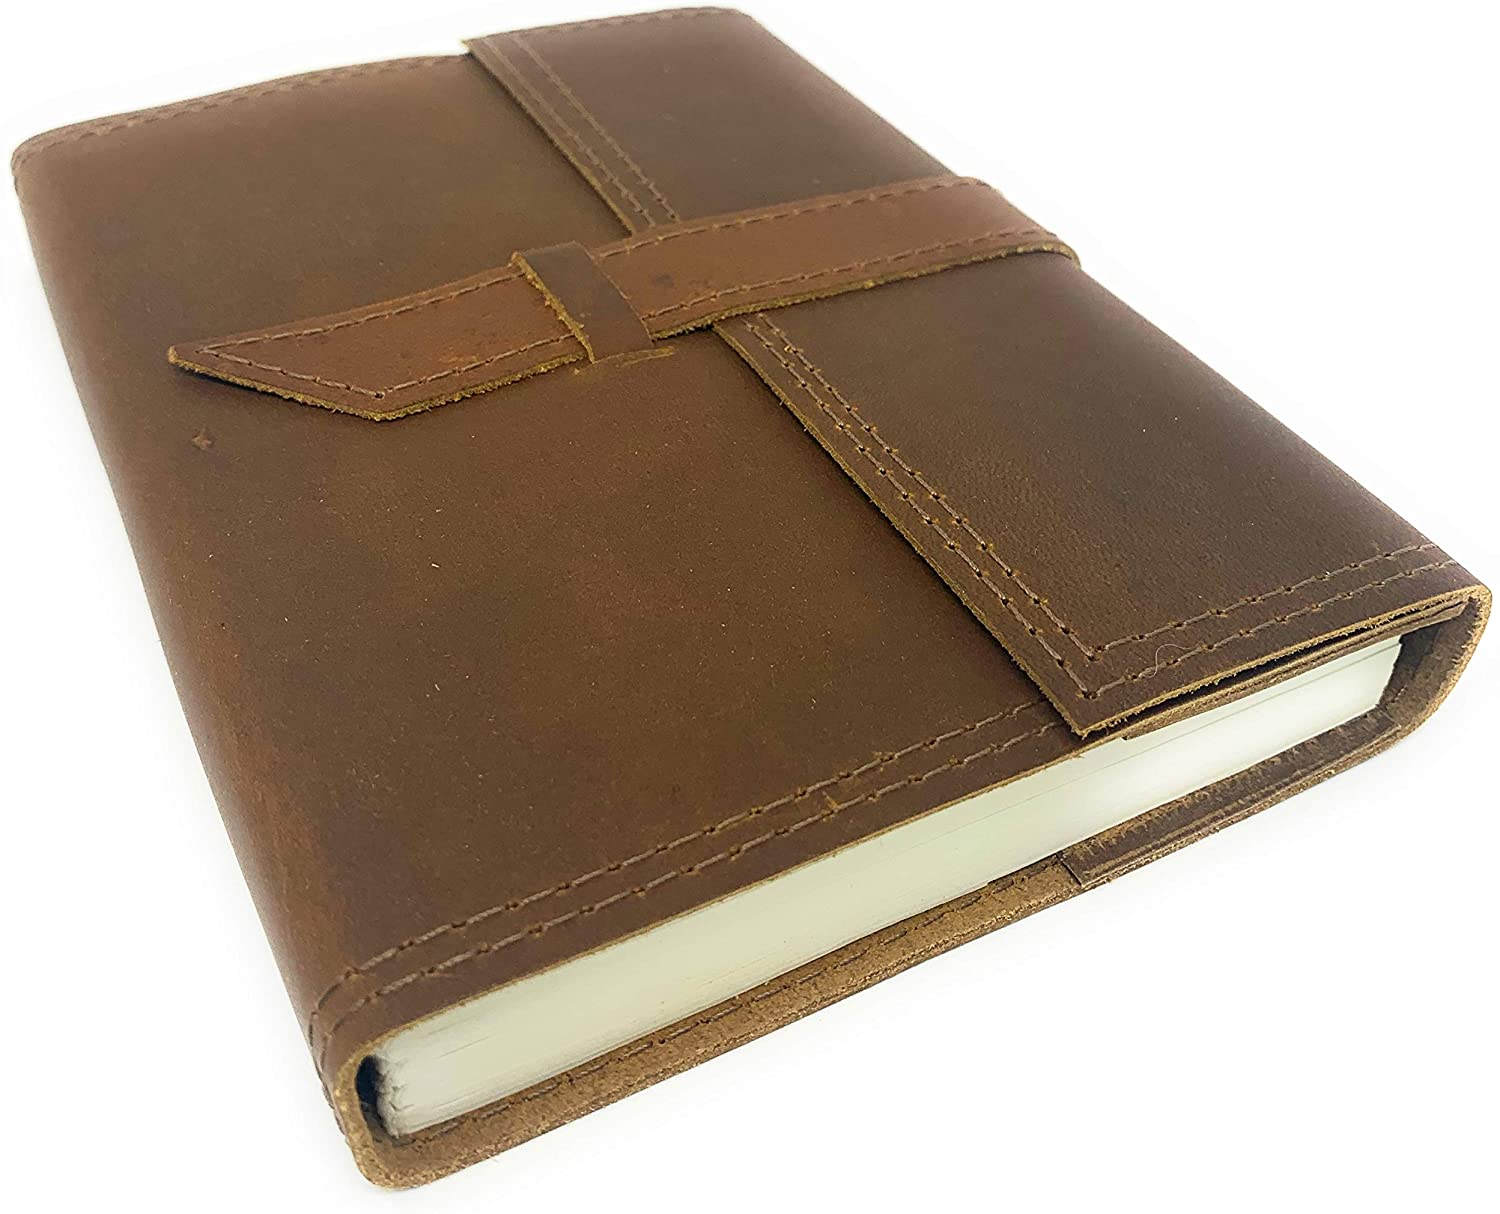 Tuk Tuk Press®  Knight Edition, Handmade Genuine Buffalo Leather Notebook Journal, Smooth Brown Finish, 200 Thick Recycled Blank Cotton Pages, Refillable